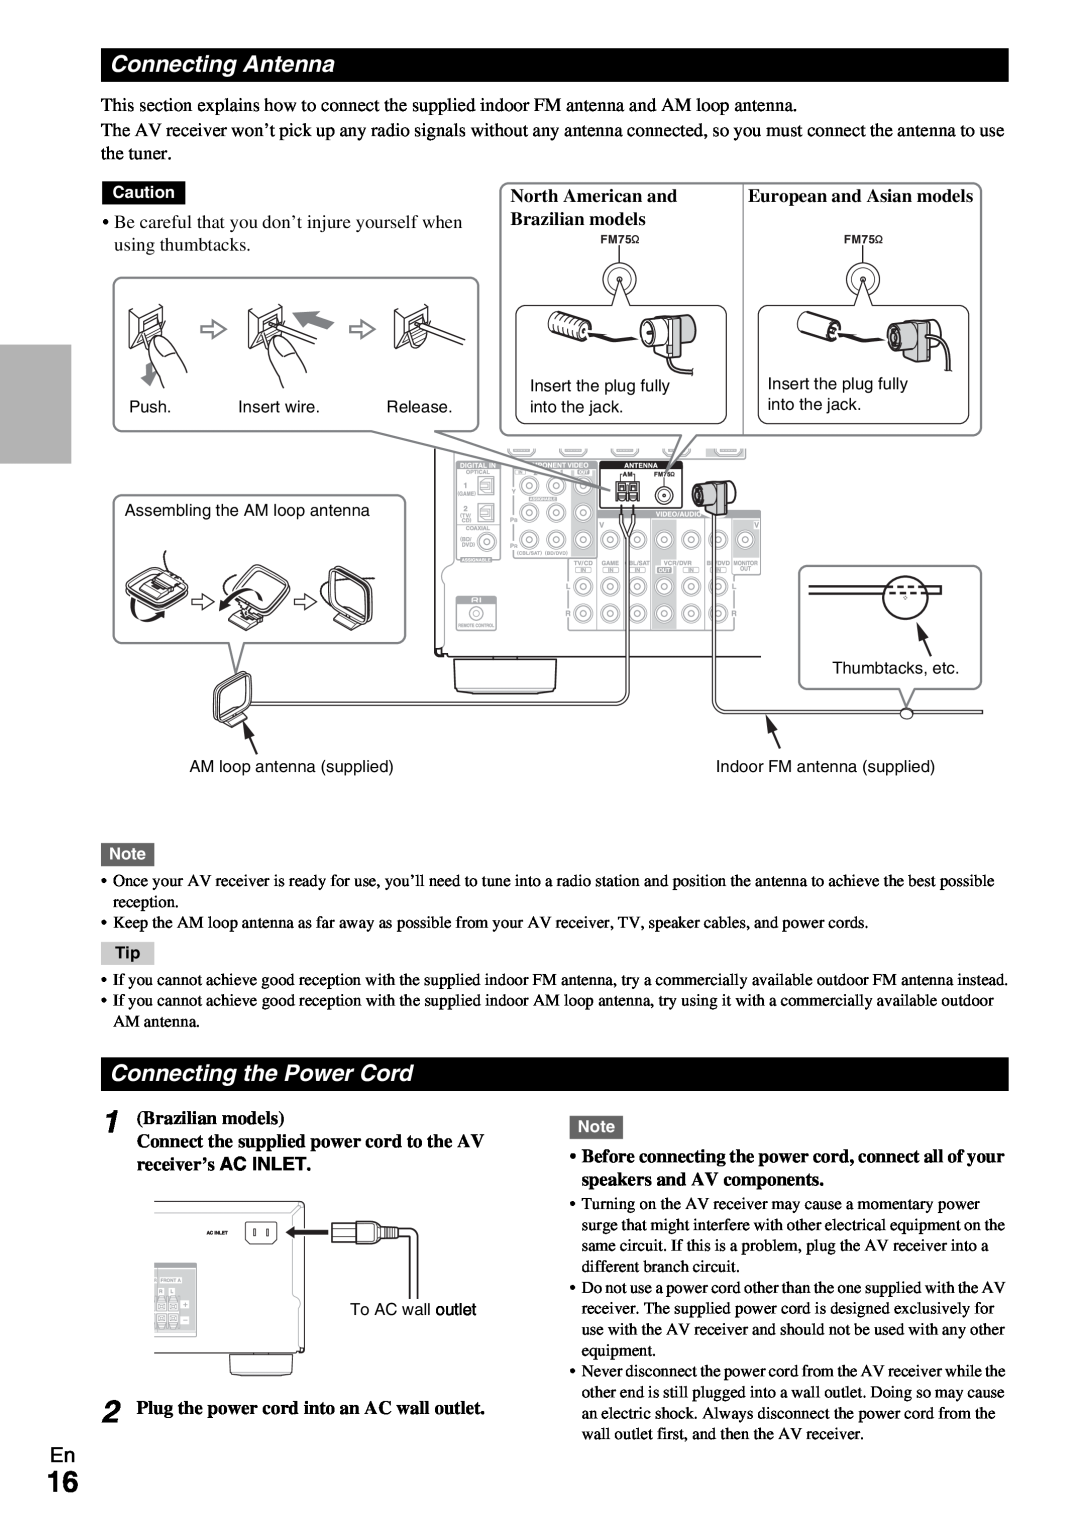 Onkyo HT-R390 instruction manual Connecting Antenna, Connecting the Power Cord, North American and Brazilian models 